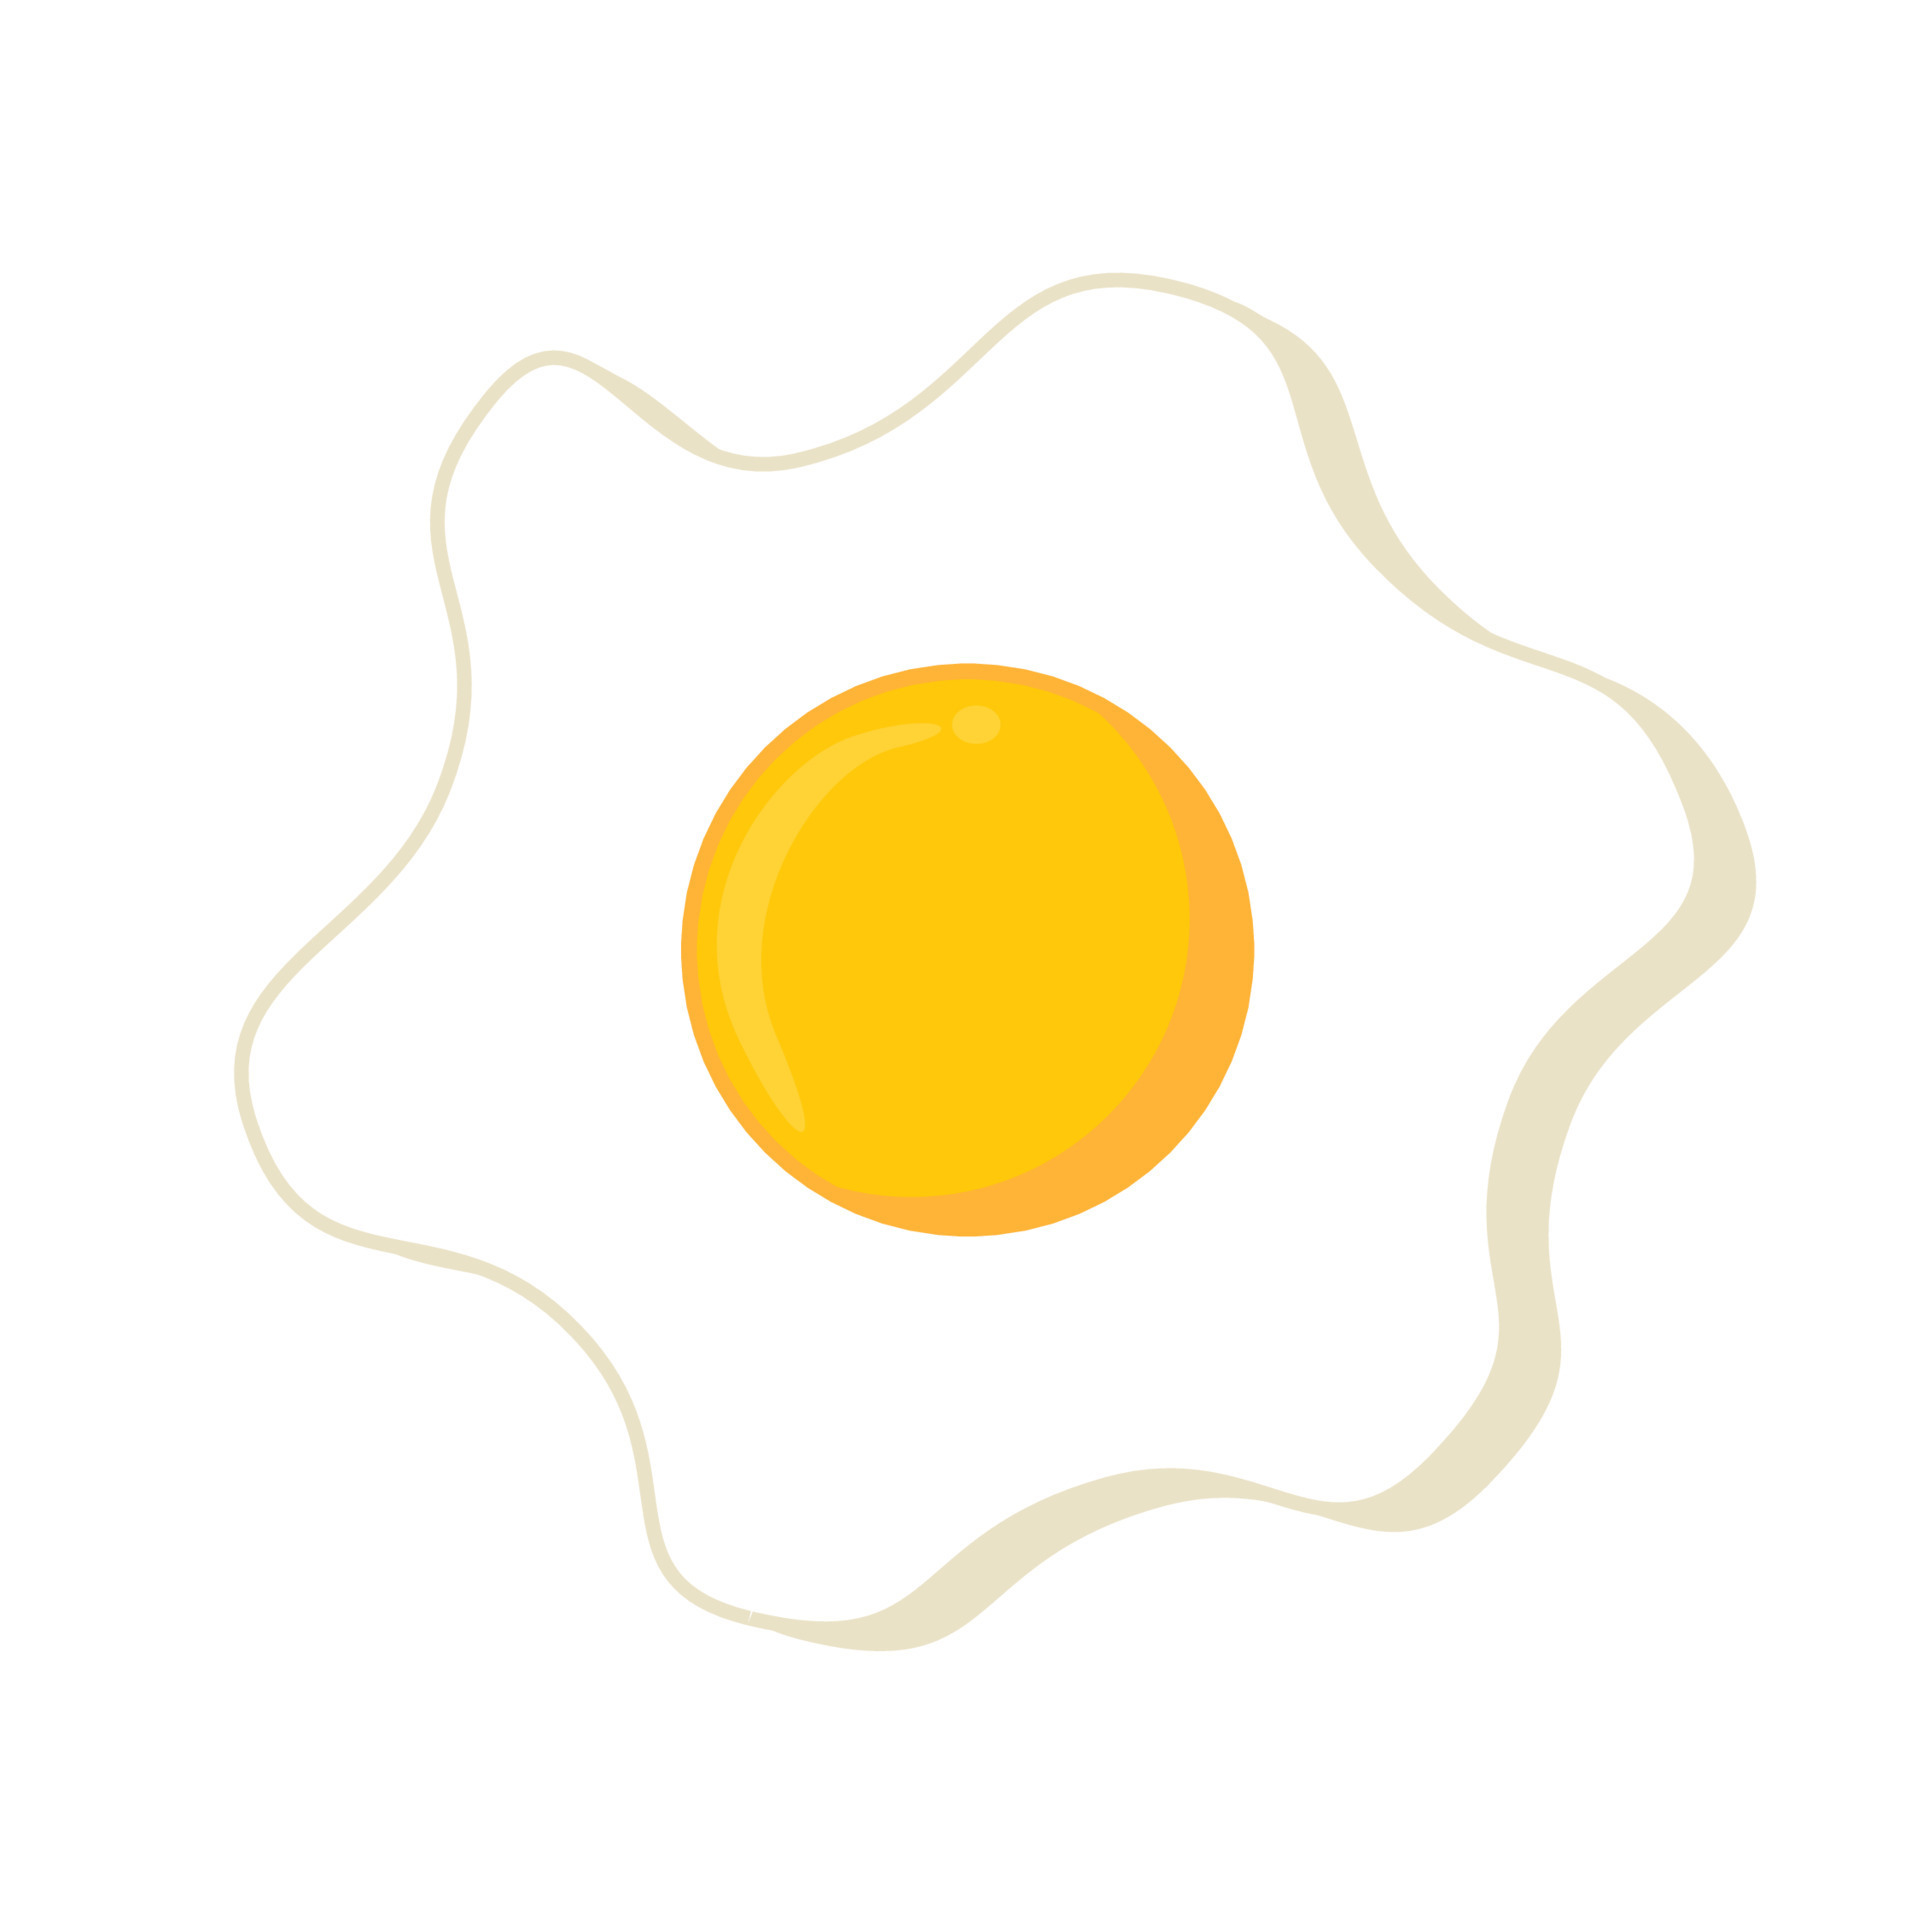 Fried egg - Free food and restaurant icons